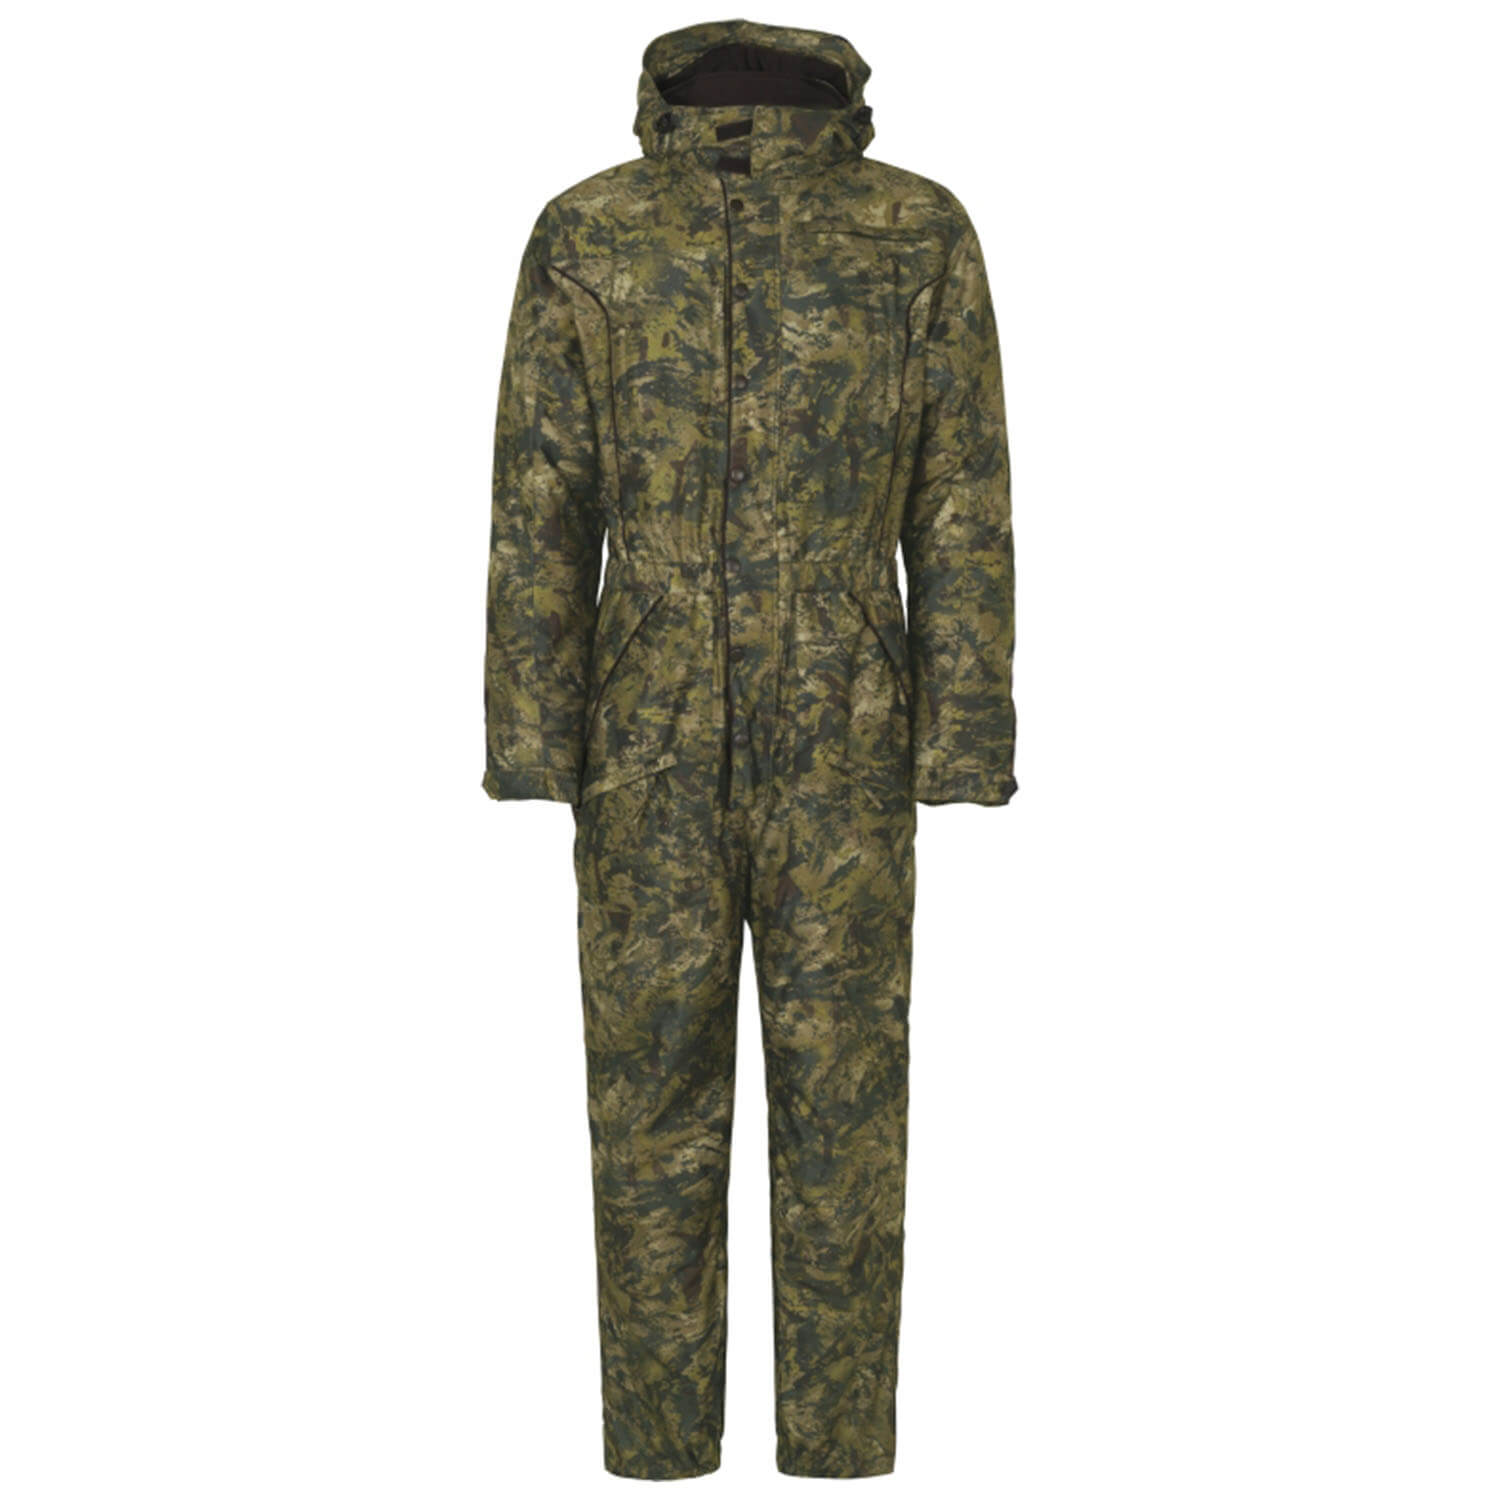 Seeland Overall Outthere (invis green)